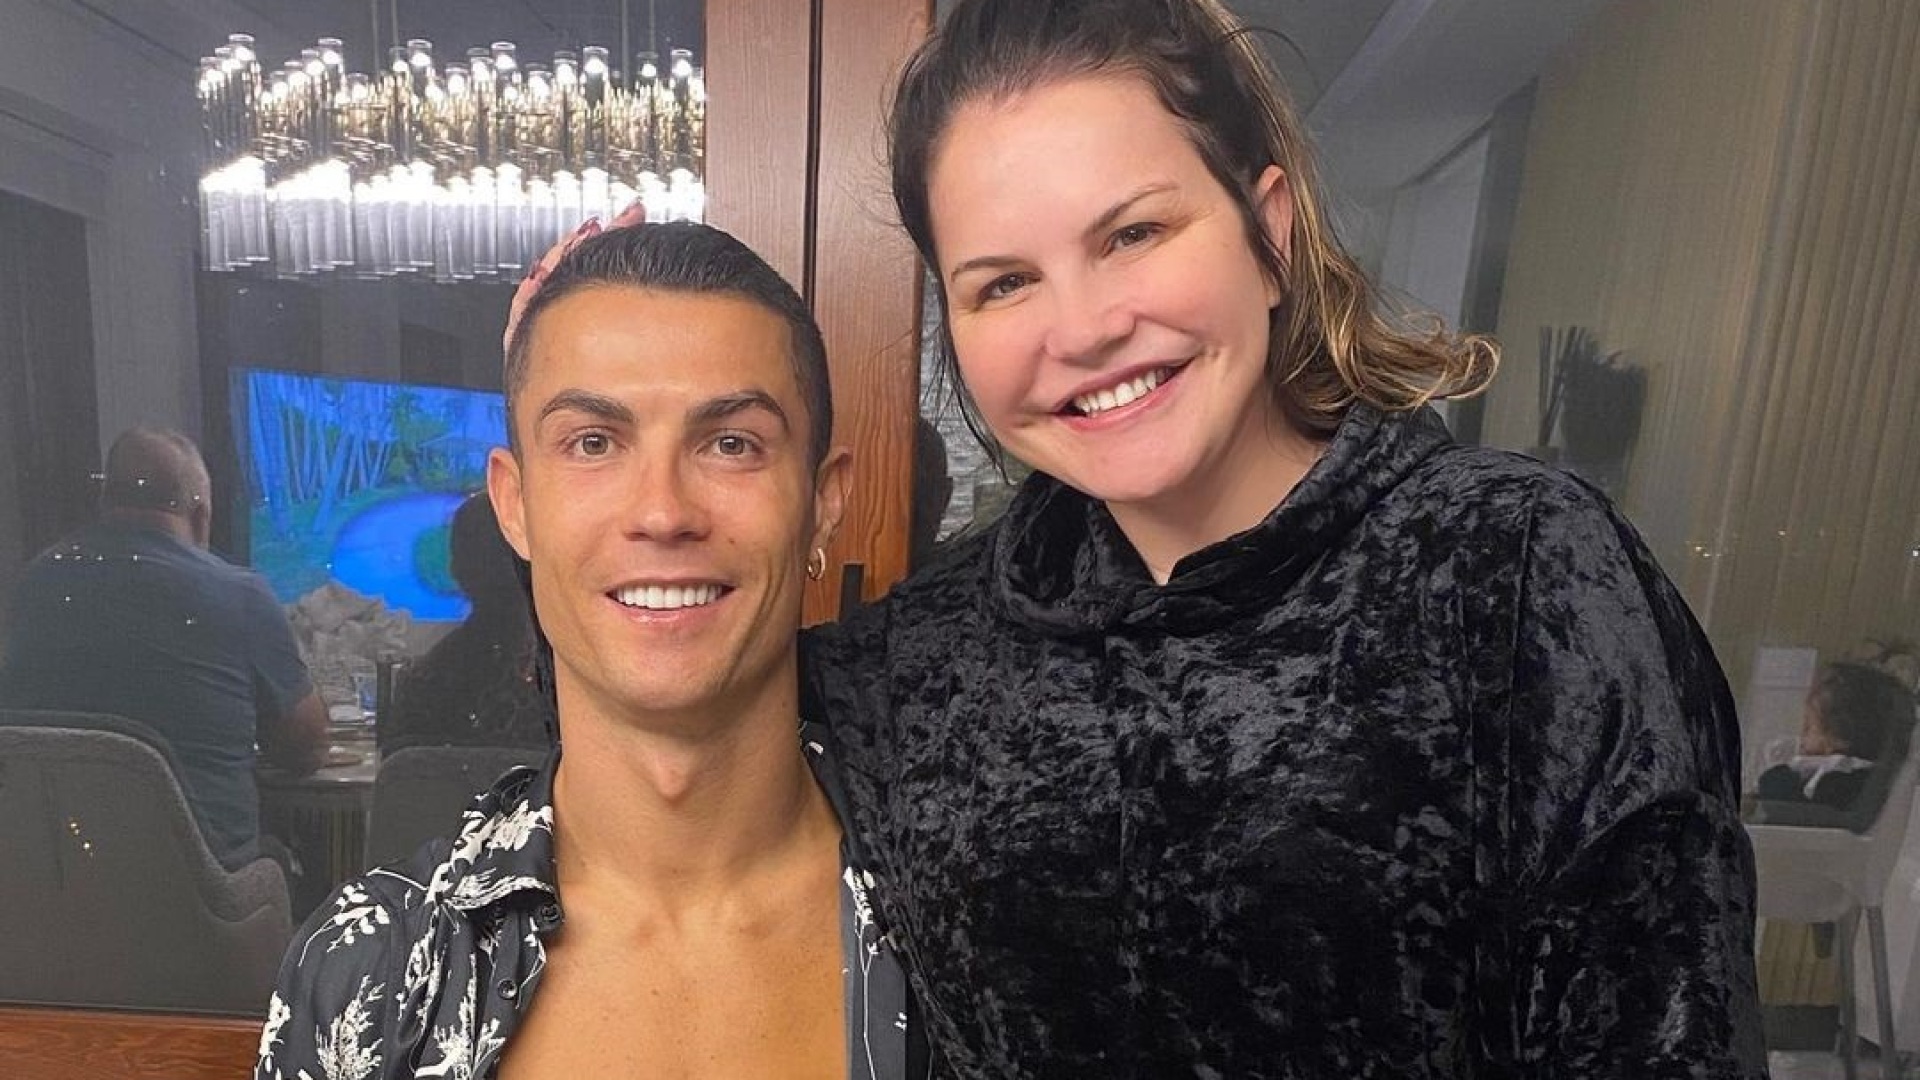 When asked by Cristiano Ronaldo’s sister about Man Utd’s future, she gives a cryptic answer